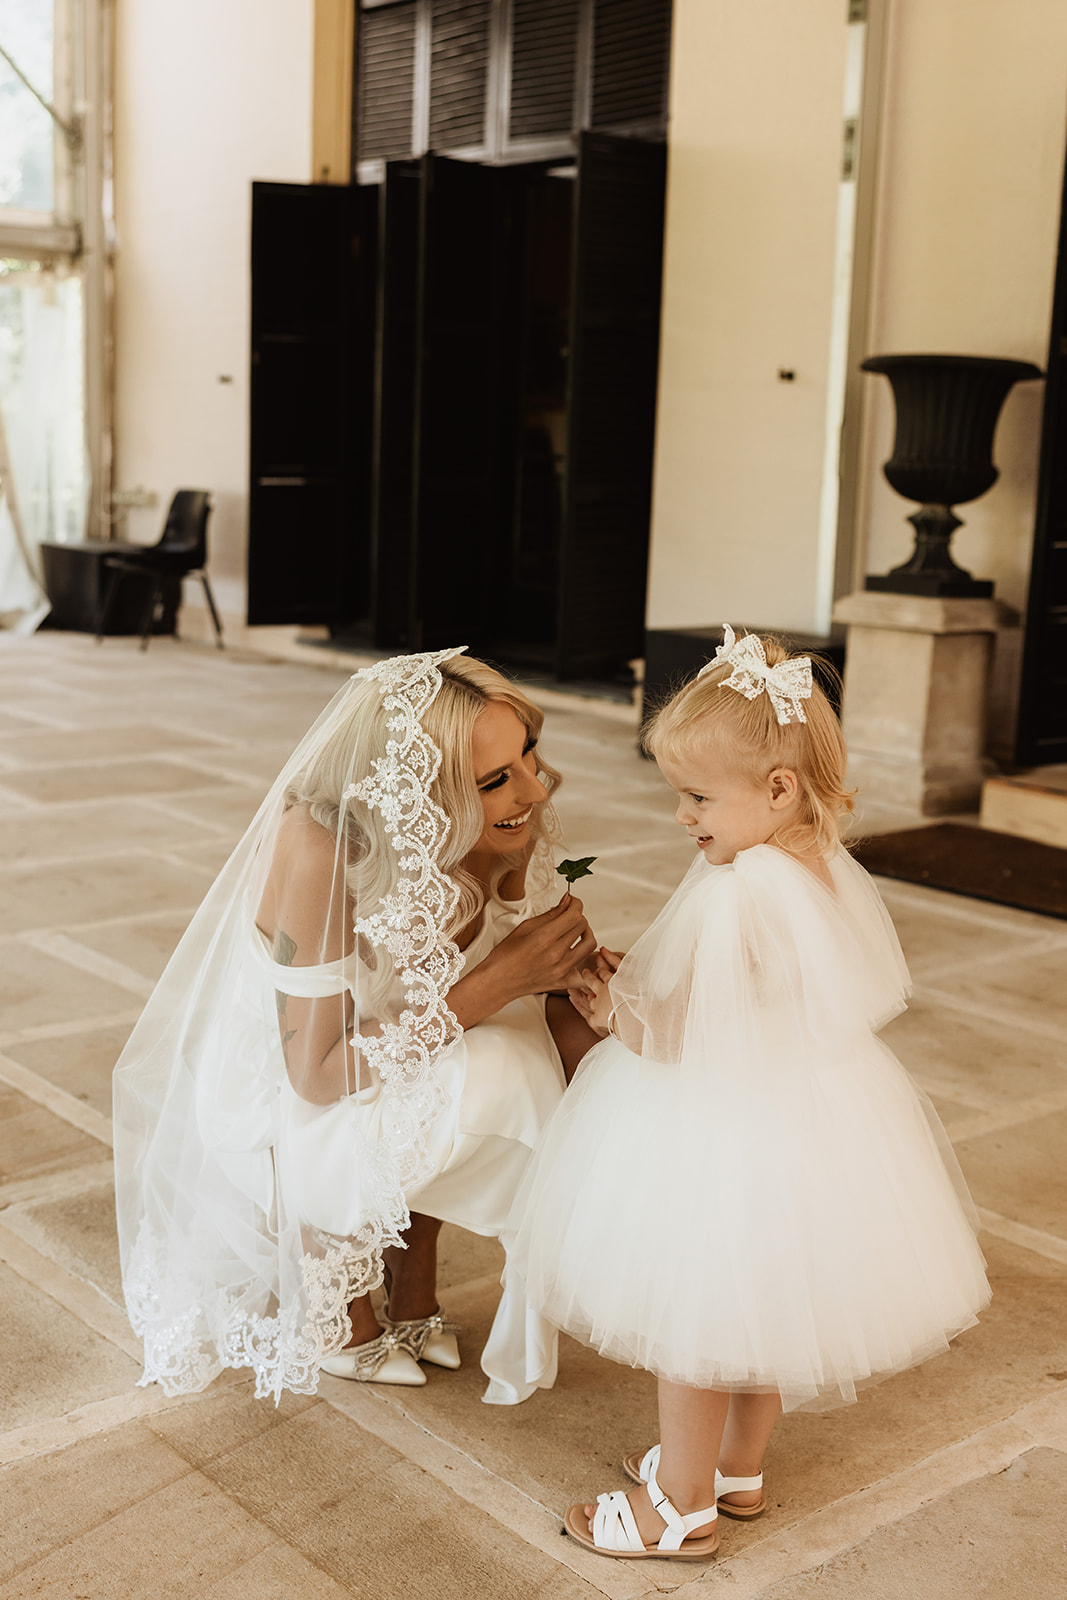 Bride with her daughter at the Wedding in Lindesay House, Darling Point New South Wales